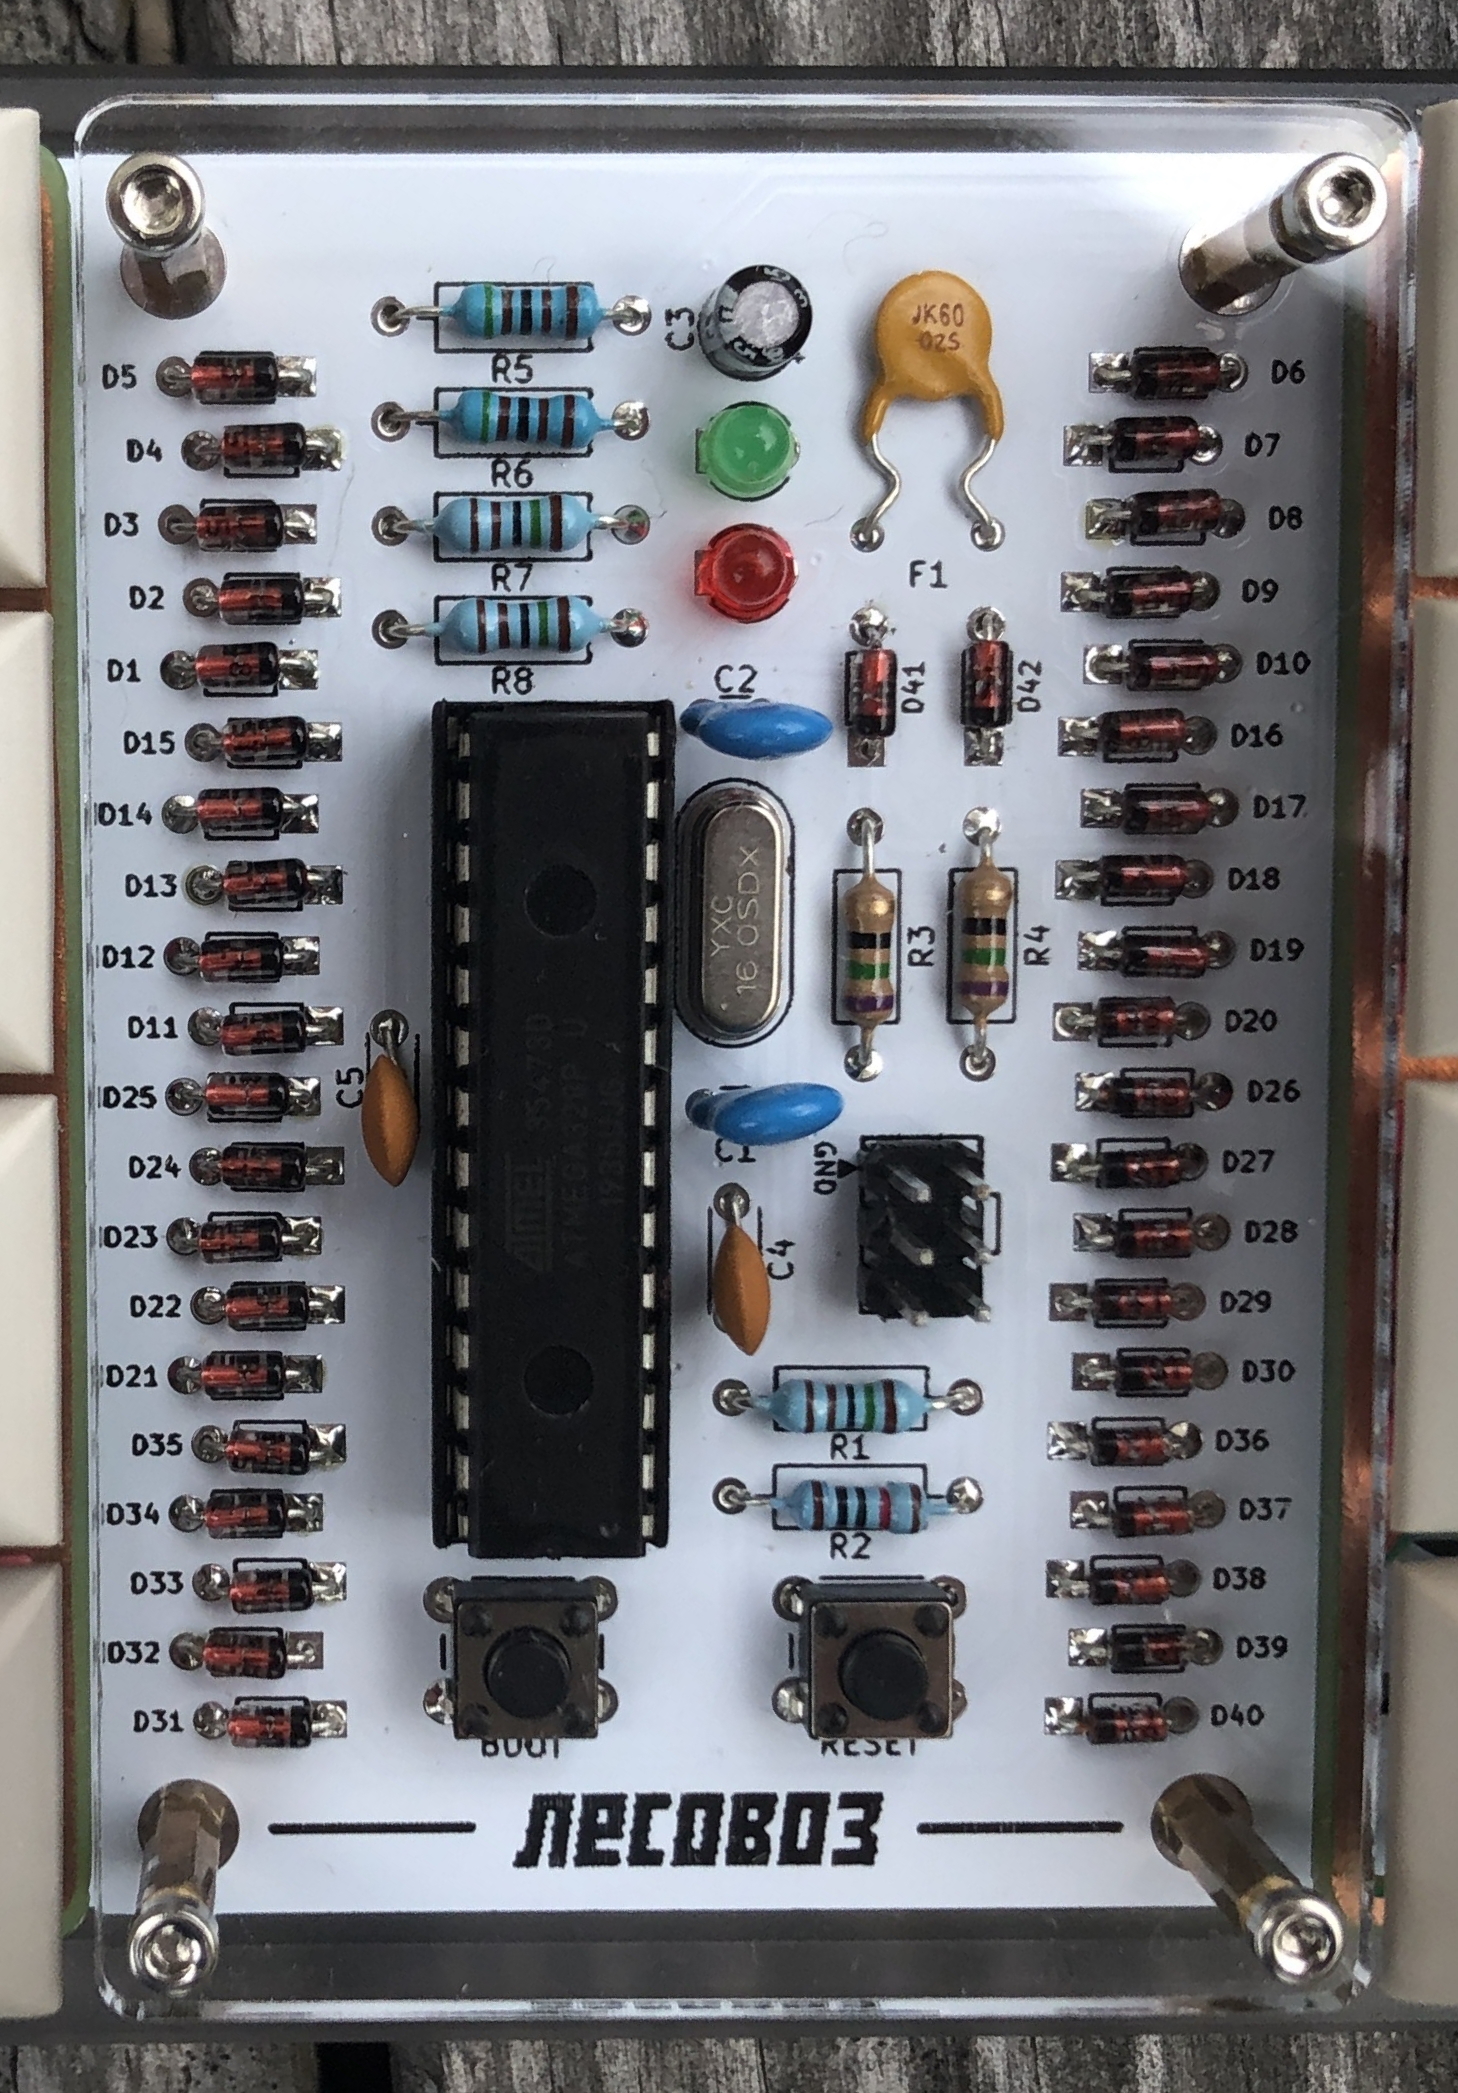 Closeup of the through-hole components in the middle of the board